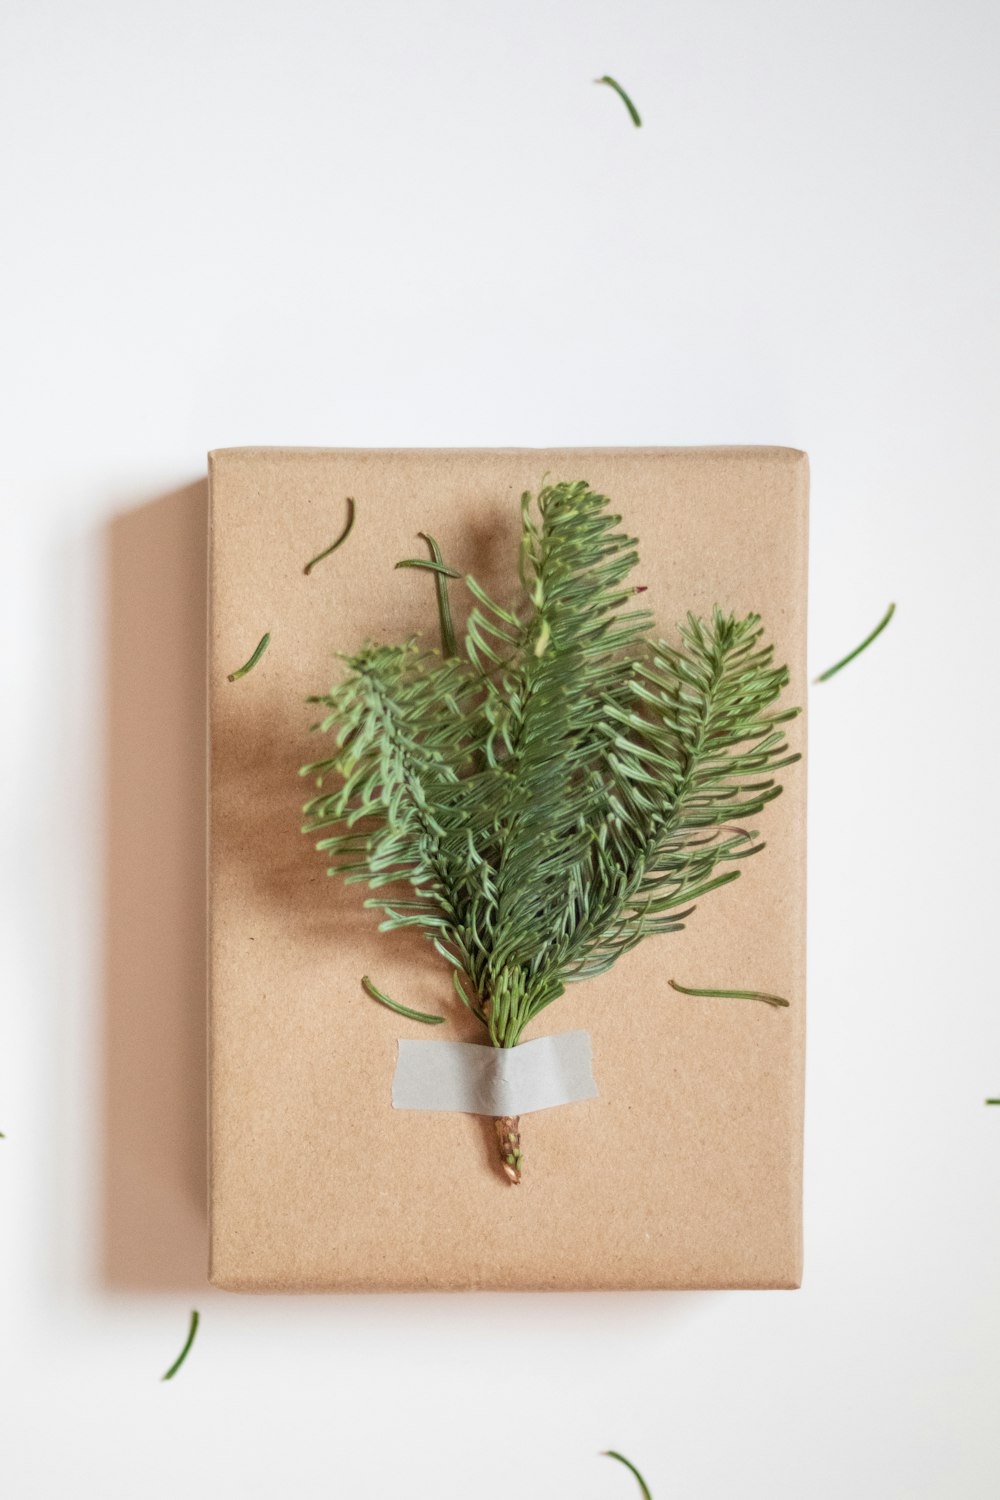 a present wrapped in brown paper with a green plant on it